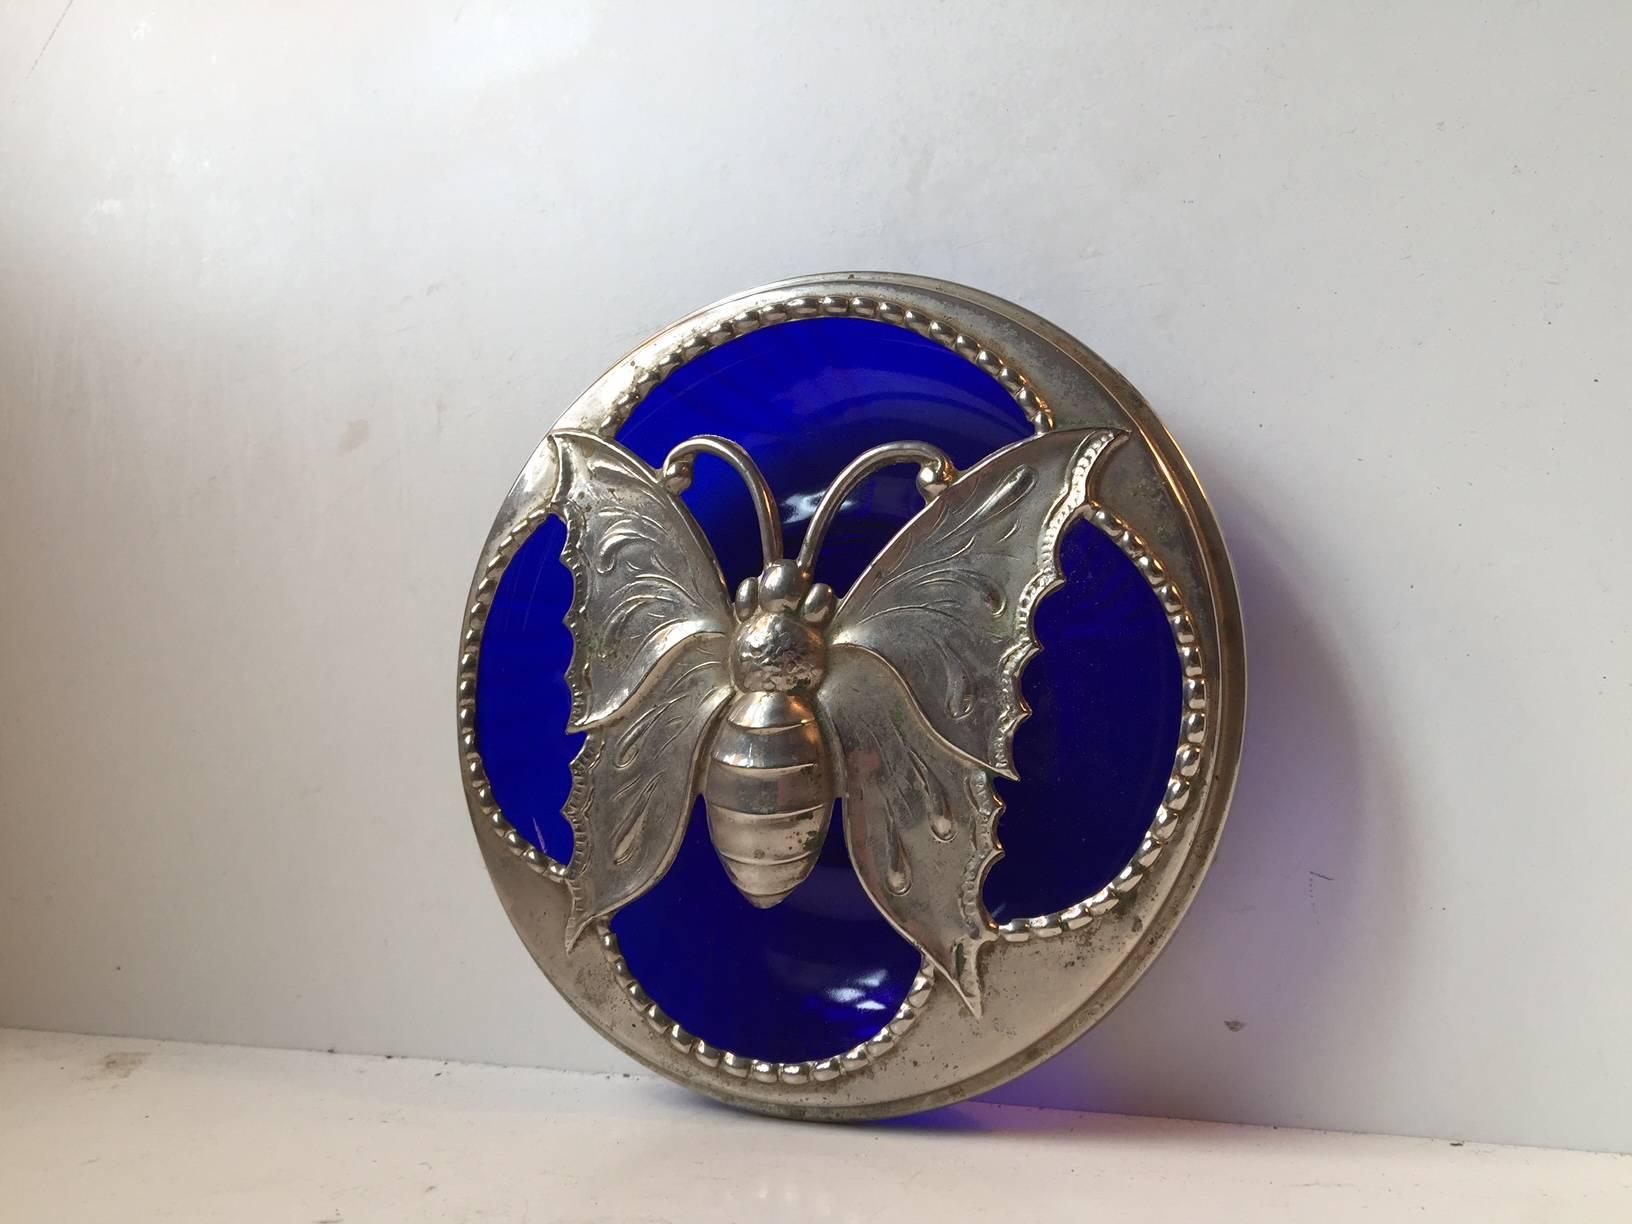 Art Deco cobalt blue glass vessel with piercet silver plated butterfly lid. It can be used as a Inscenter for Potpourri or alternatively an Ashtray. It was made in France by an anonymous Silversmith.